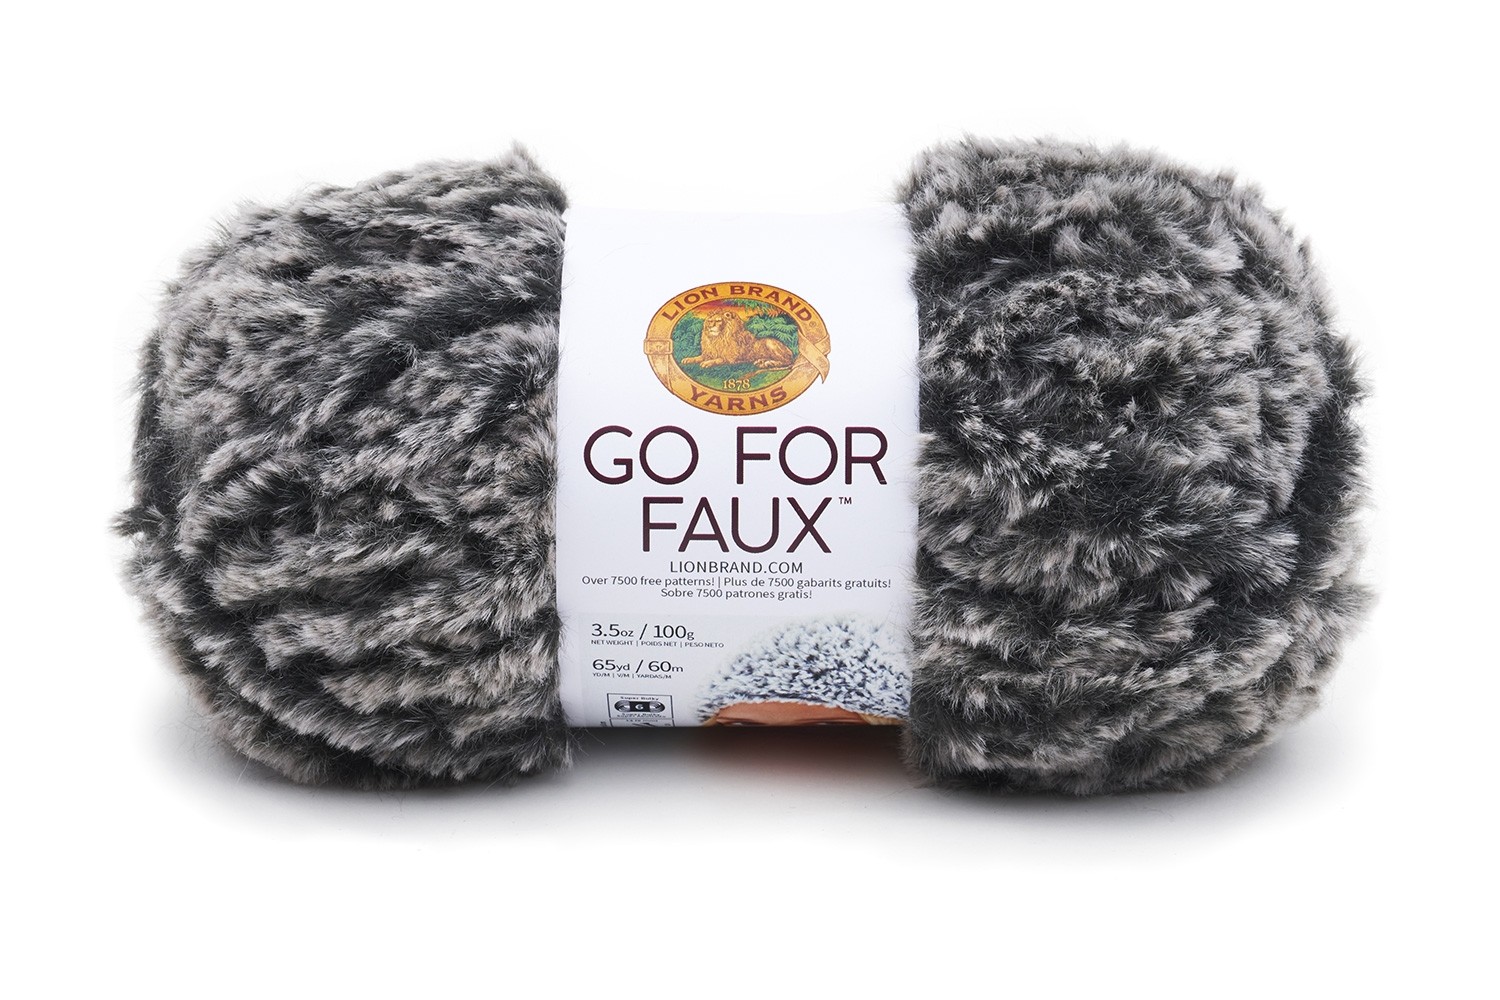 This Just In! Go For Faux Yarn